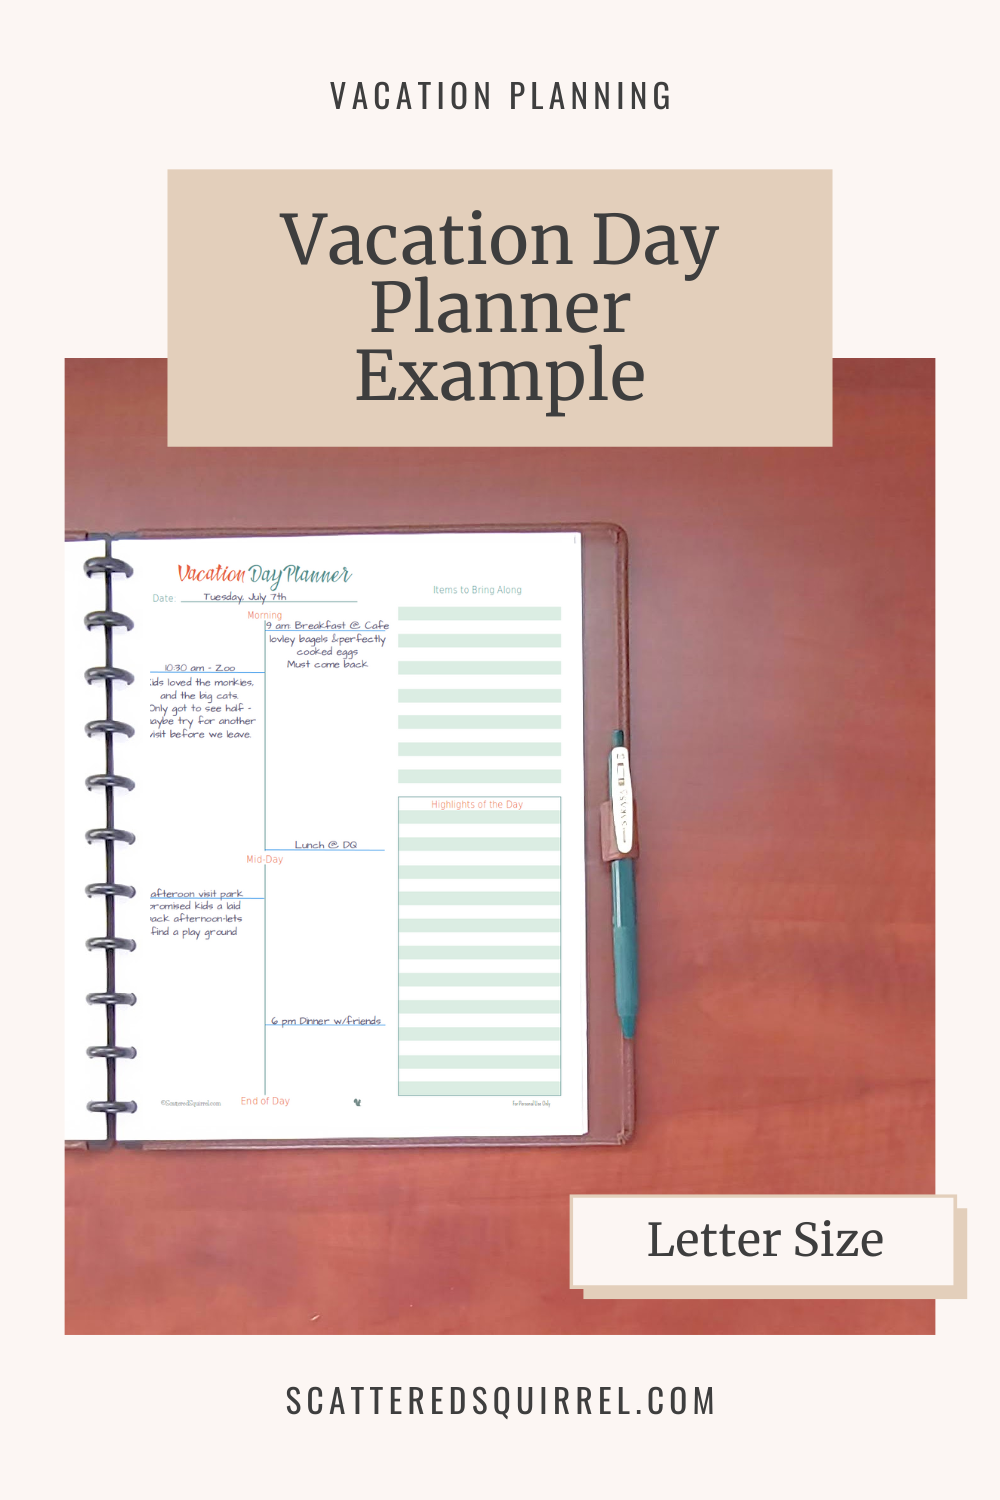 This image is a large, light sand coloured rectangle in portrait orientation. "Vacation Planning" is written at the top in dark green text. Under that is a tan box with dark grey title text that says, "Vacation Day Planner Example" Below that is a photo the right hand side of a planner which is lying on a wooden desk. The page on the planner is a vacation day planner, designed in organge and teal. There are examples of how to use this planner page filled in on the planner. At the bottom right corner of the photo is a label that says "Letter Size."